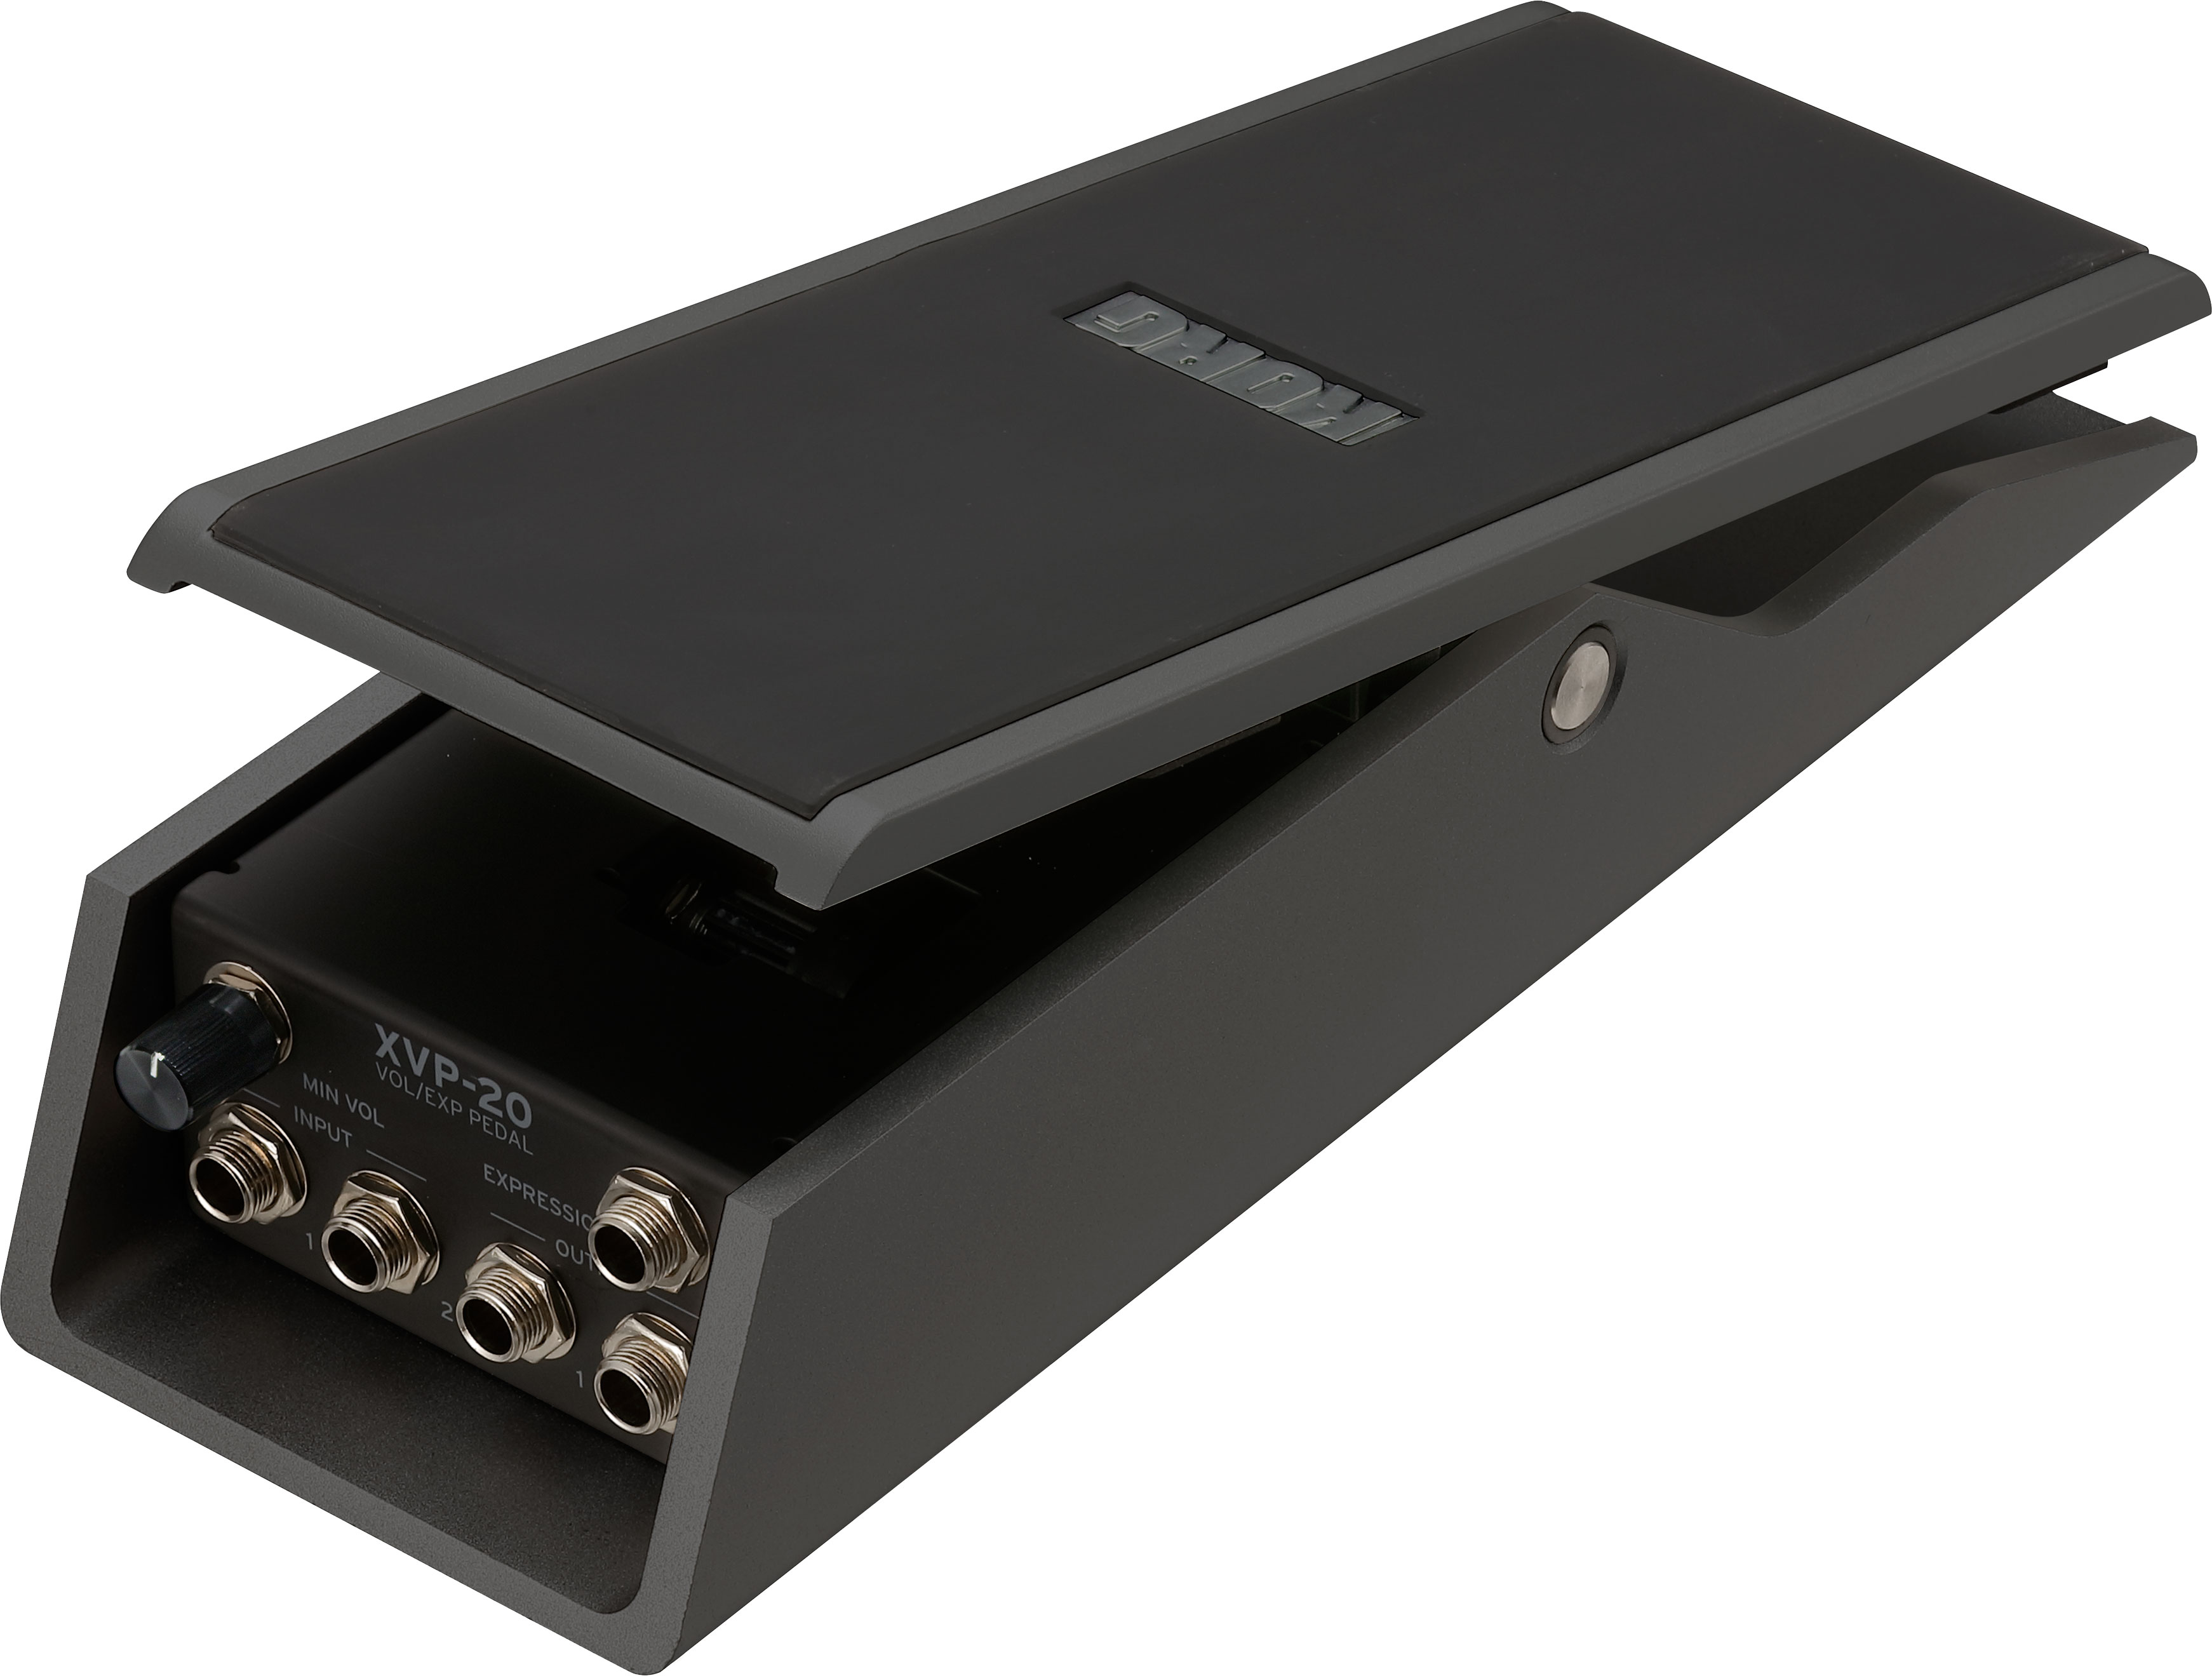 XVP-20 Expression/Volume Pedal